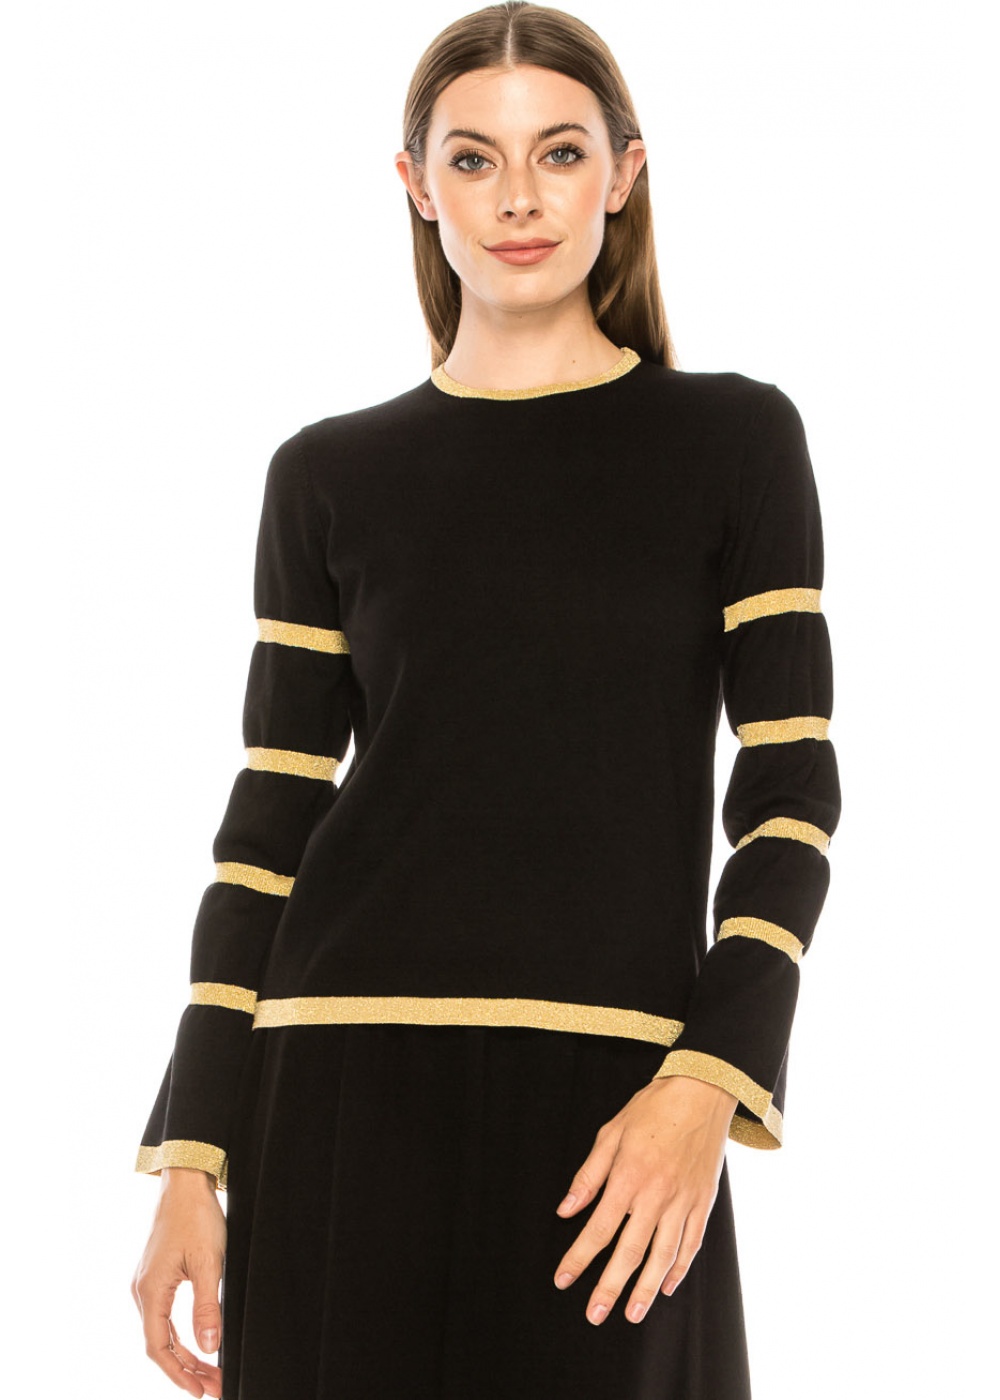 Bell sleeve sweater with accent stripes